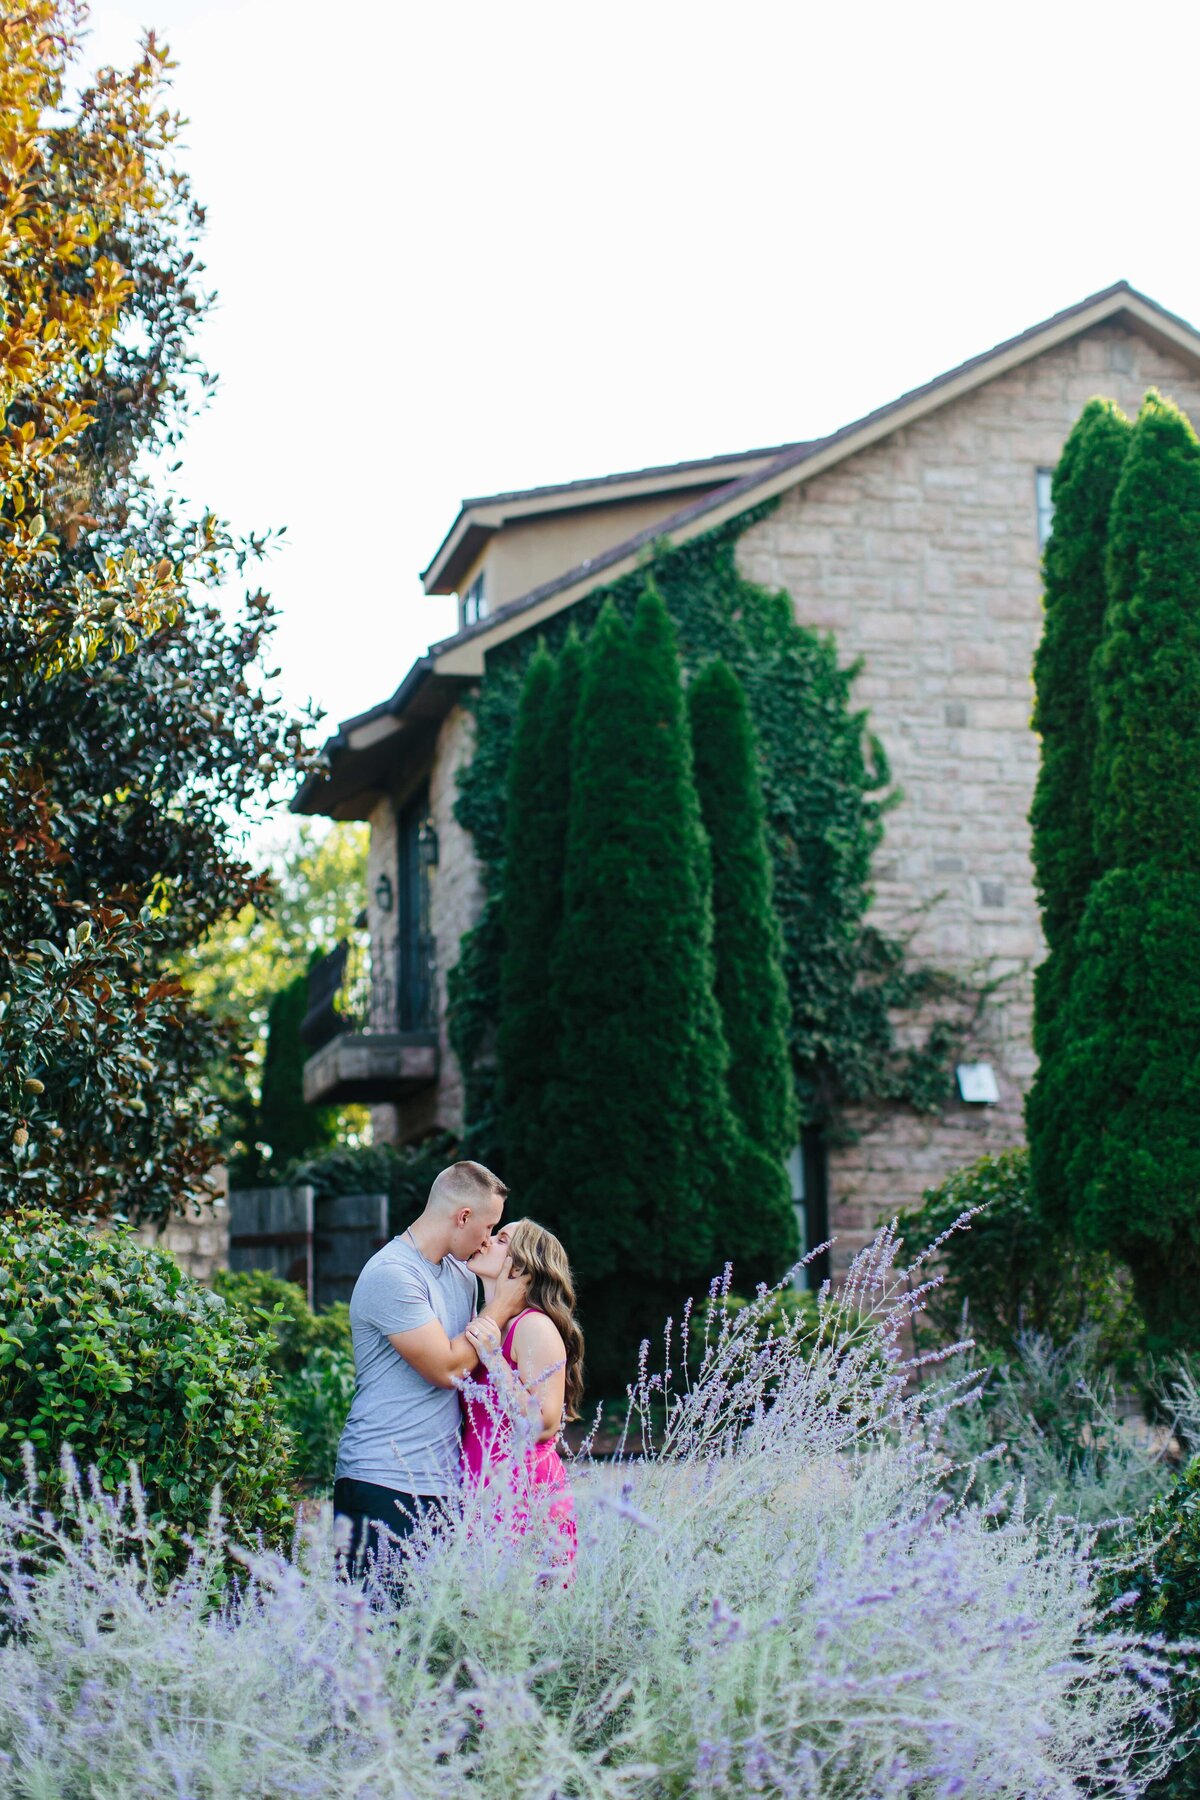 exterior view of chateau selah wedding venue photography